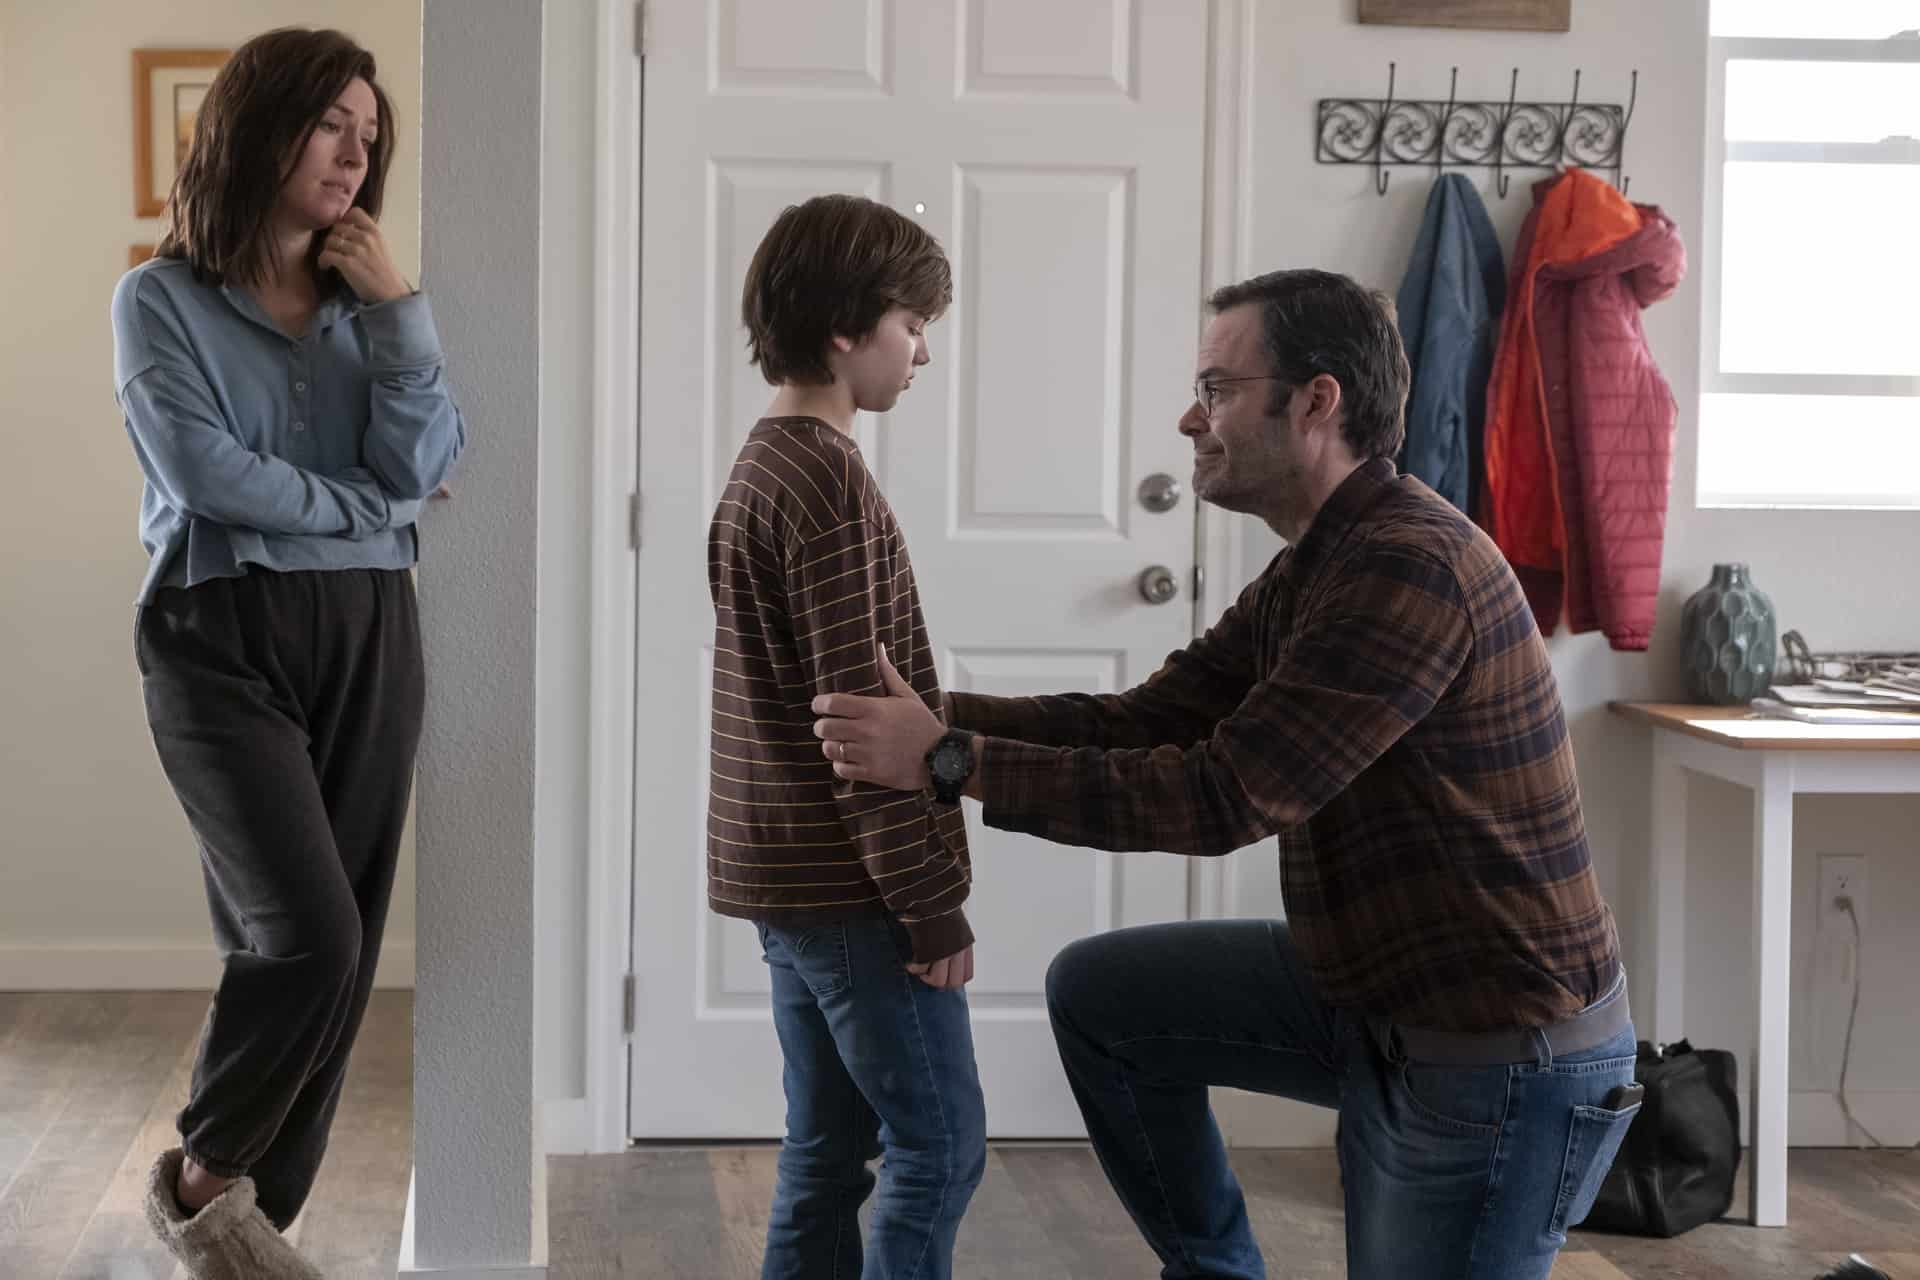 A man kneels in front of a young boy while a woman looks on in this image from HBO Entertainment.